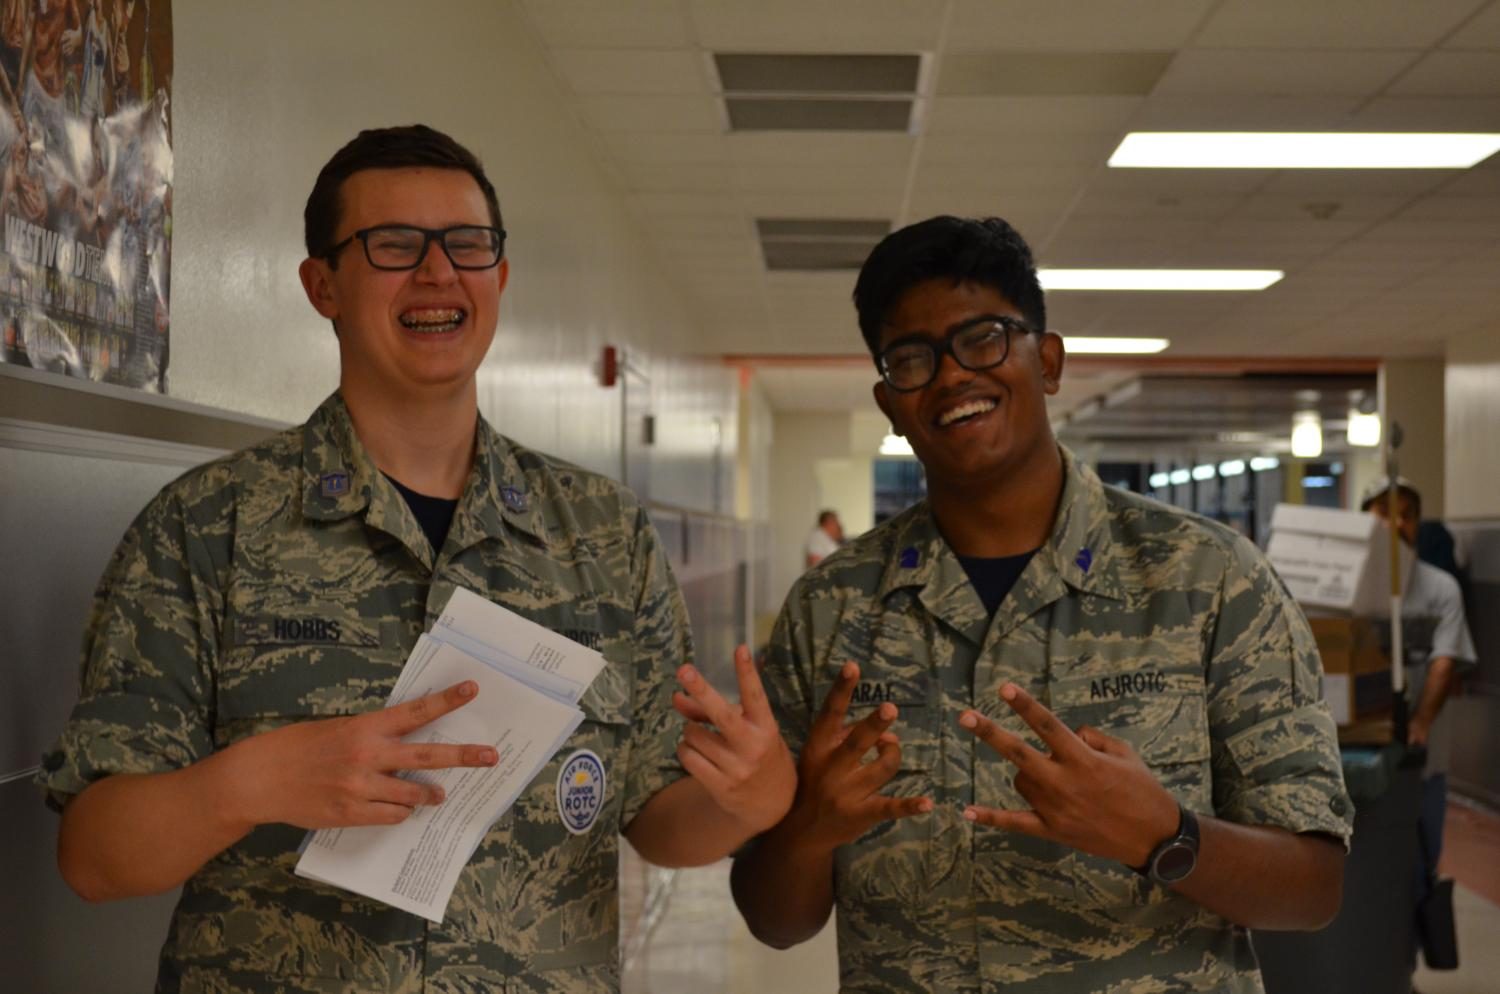 Mitchell Hobbs ’20 and Ronan Karat ’19
AFROTC students smile after helping guide several parents to their classrooms.